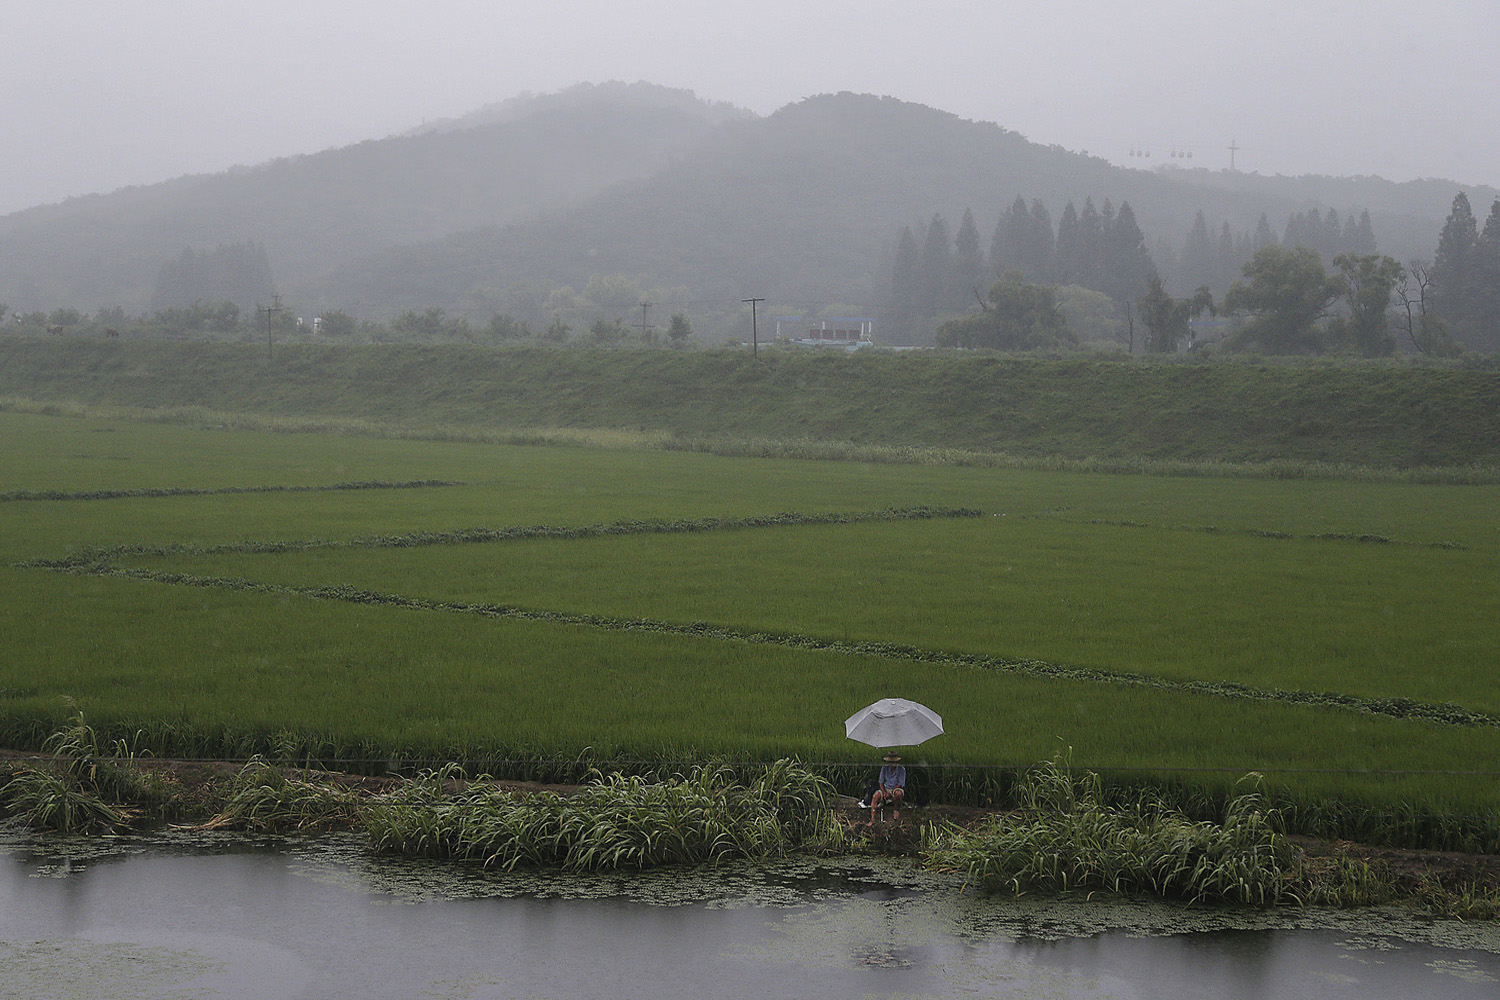 A farmer sits at a rice field on a rainy morning in Pyongyang, Jul. 30, 2014. As the planting season ends and rainy season begins, North Koreans are girding for the possibility of floods after weeks of drought.